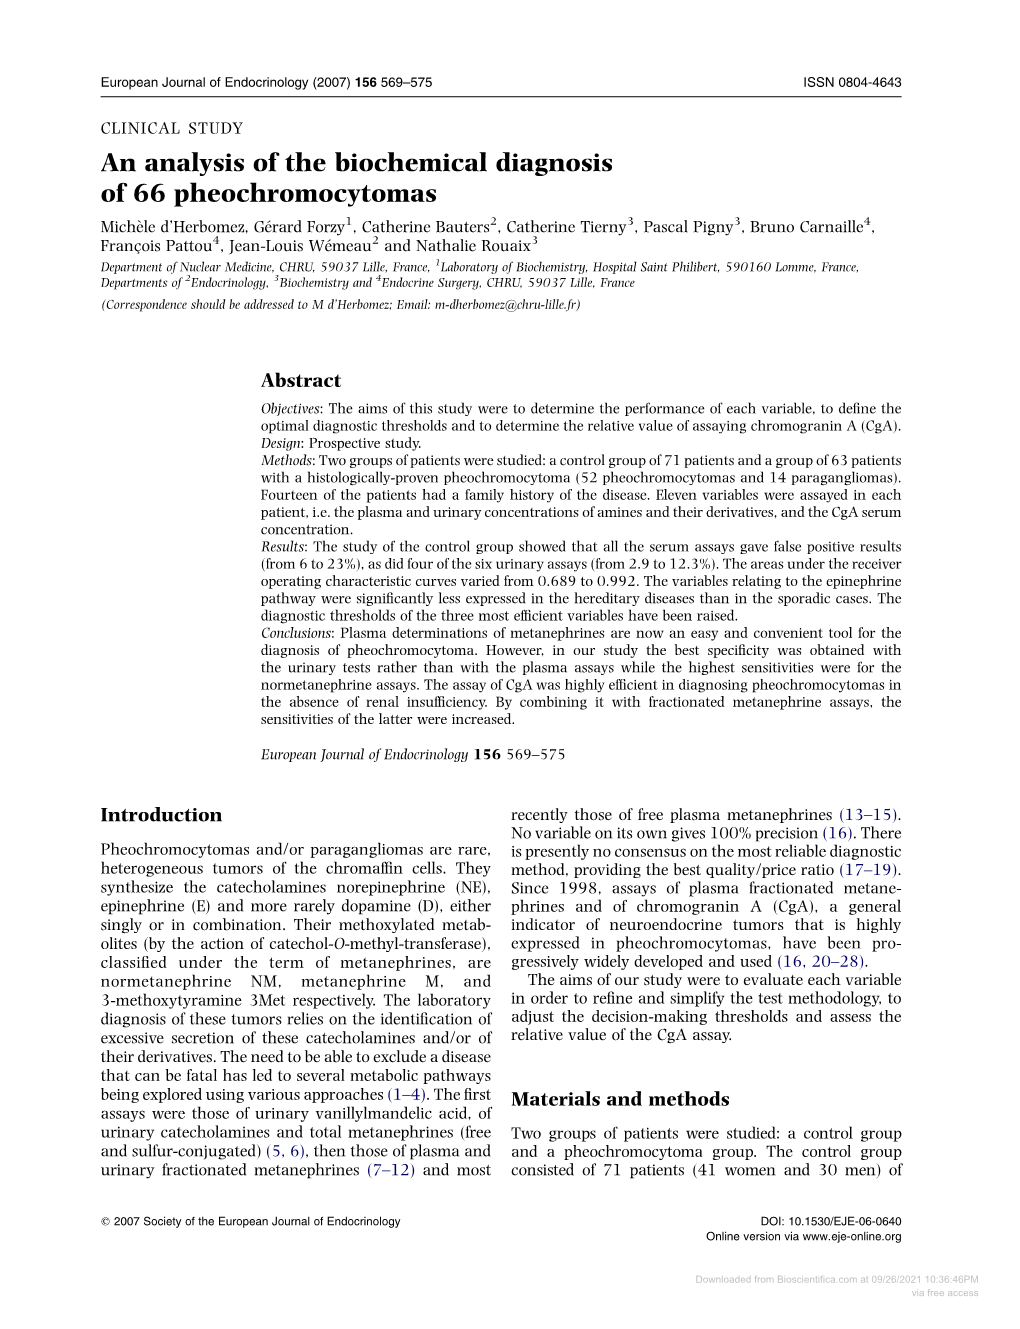 An Analysis of the Biochemical Diagnosis of 66 Pheochromocytomas